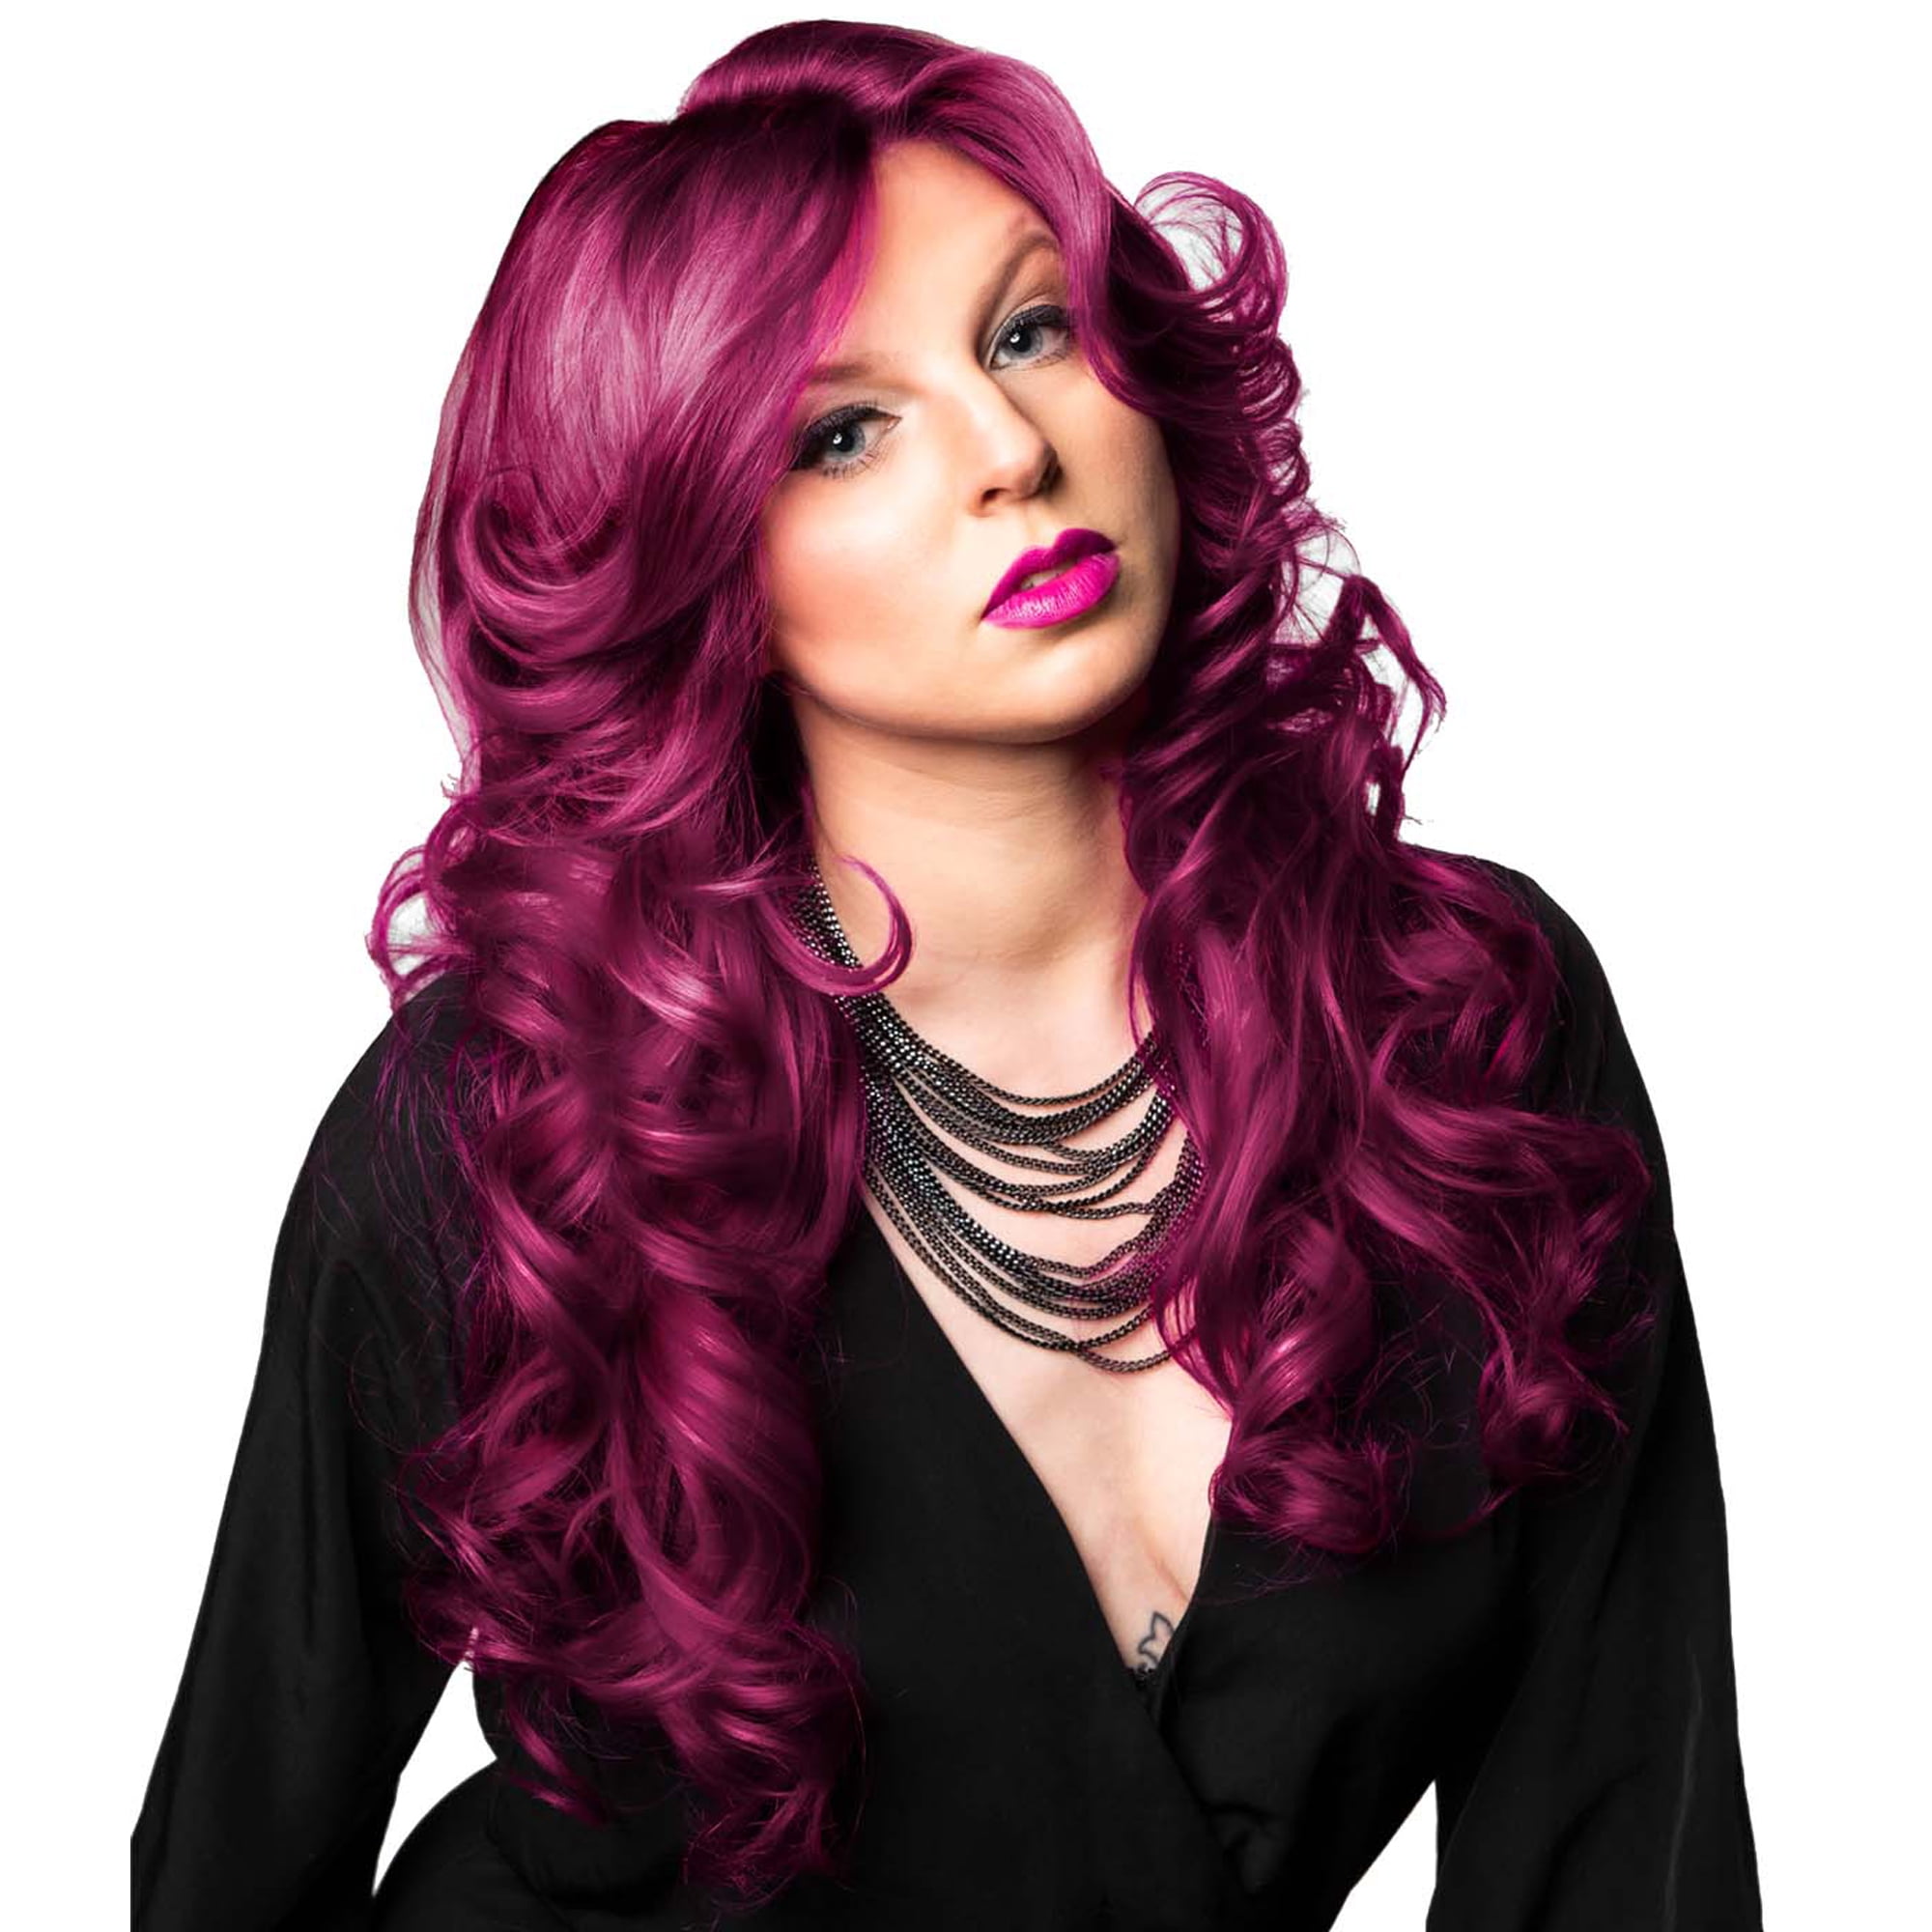 81 Hottest Pink Hair Color Ideas - From Pastels to Neons